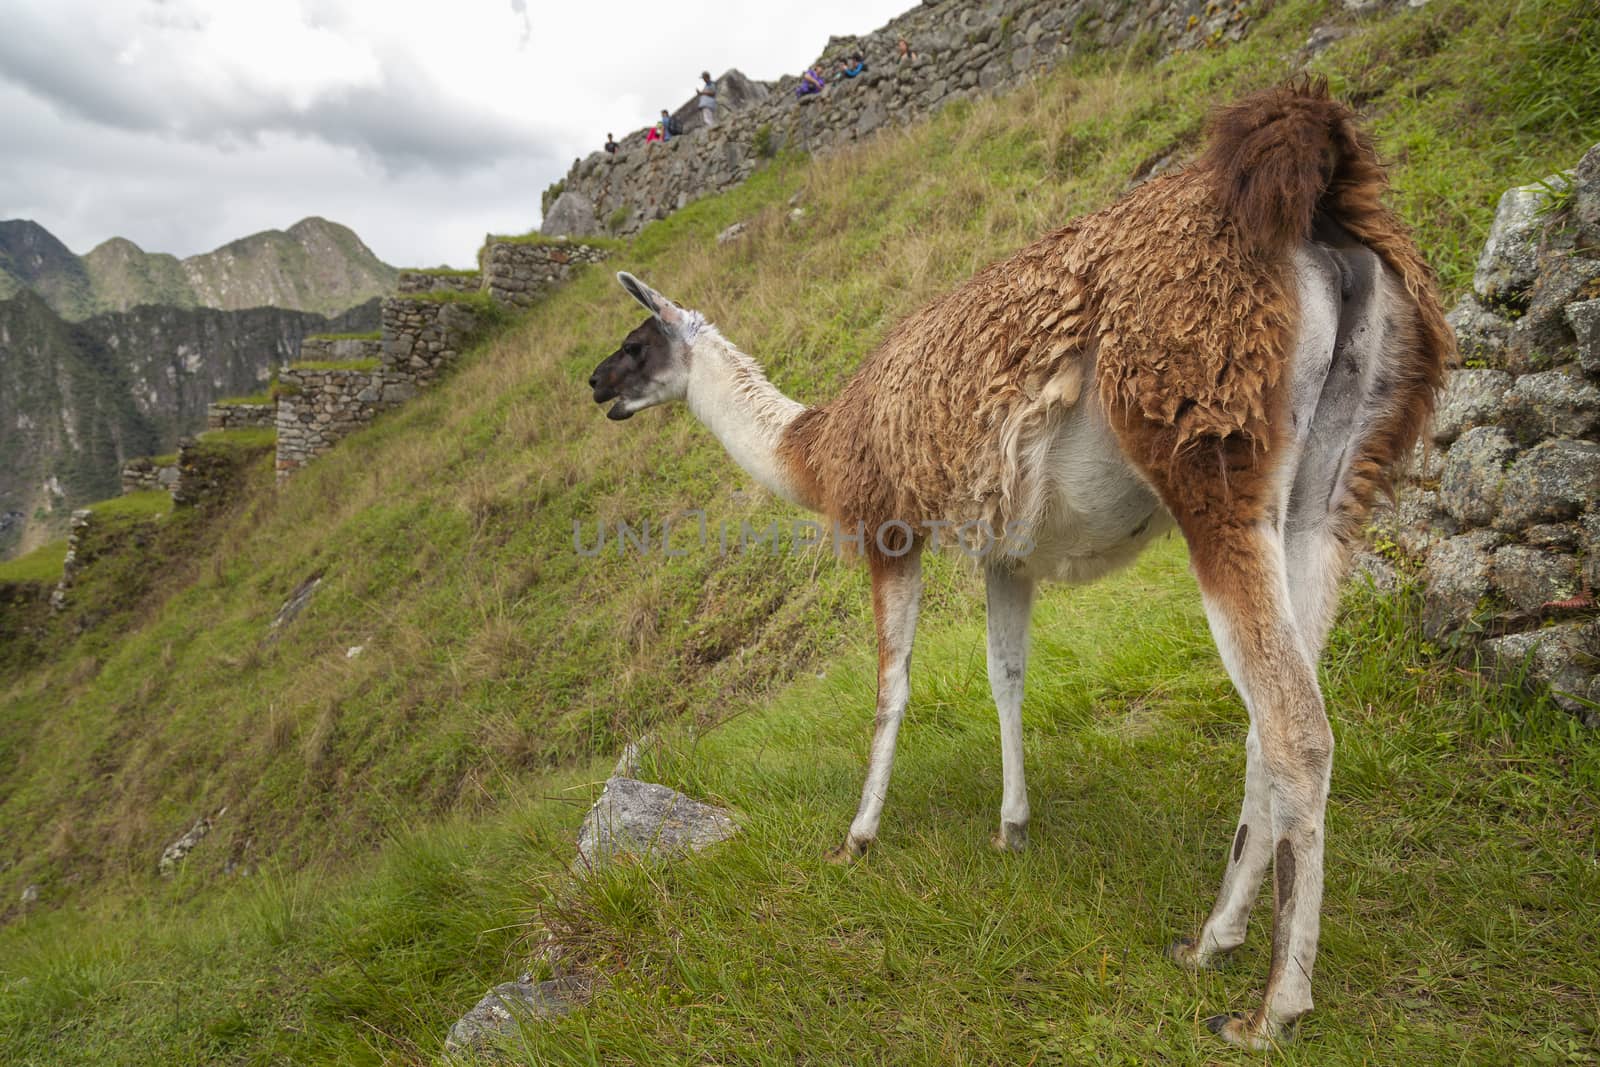 A llama watches quietly from the top of the terraces in Machu Picchu, Peru by alvarobueno